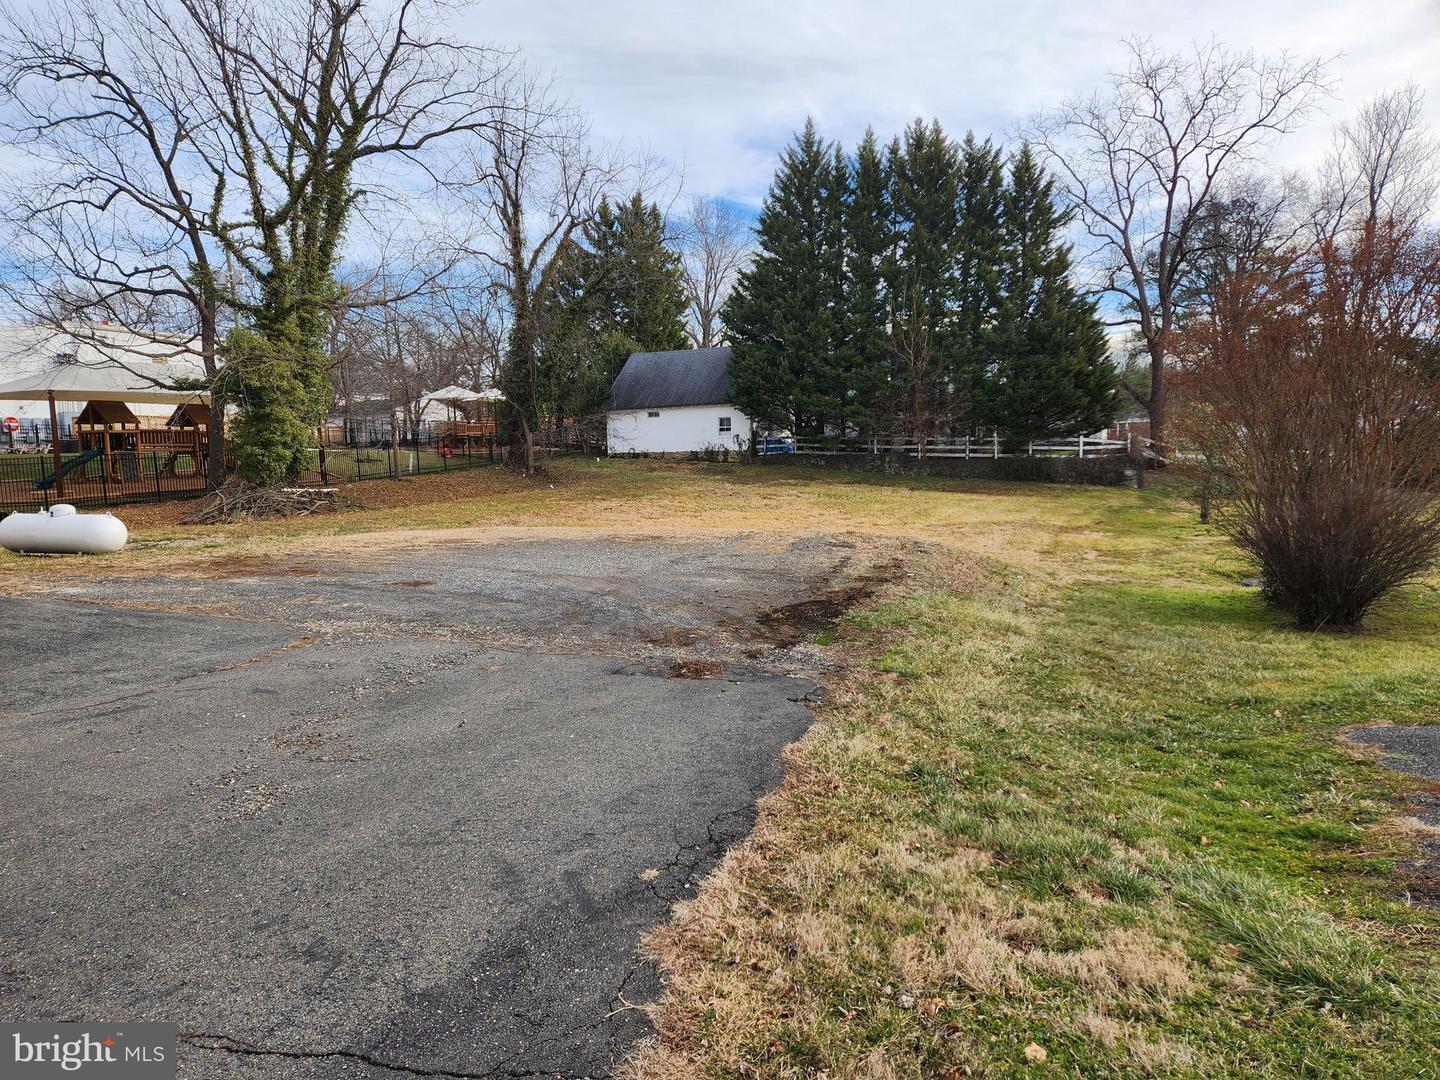 140 S 20TH ST, PURCELLVILLE, Virginia 20132, ,Land,For sale,140 S 20TH ST,VALO2017242 MLS # VALO2017242